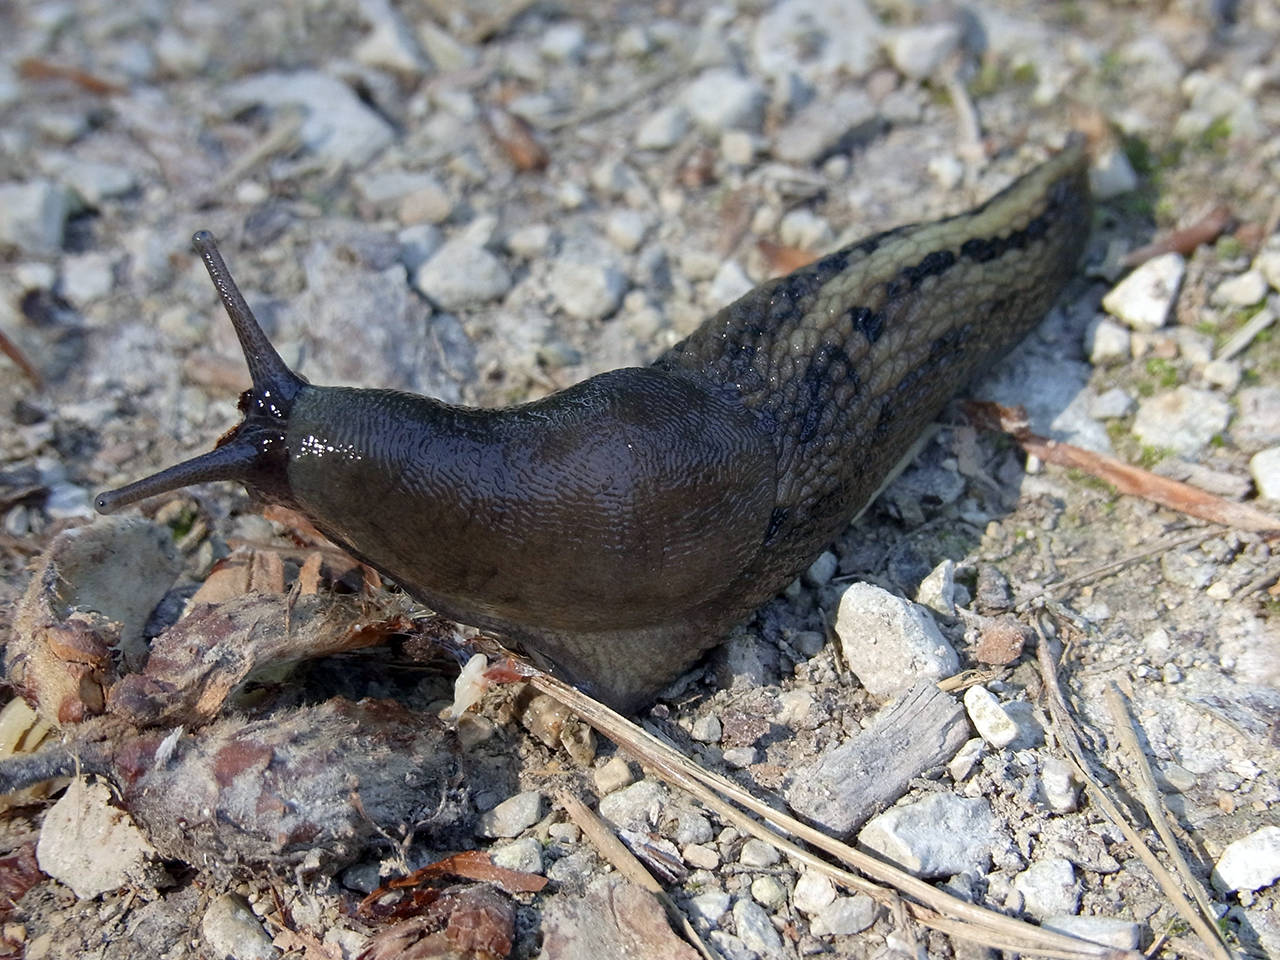 Slugs can be controlled with products containing the active ingredient iron phosphate. These are made from naturally occurring elements and are safe for use around people, pets and other non-target organisms.